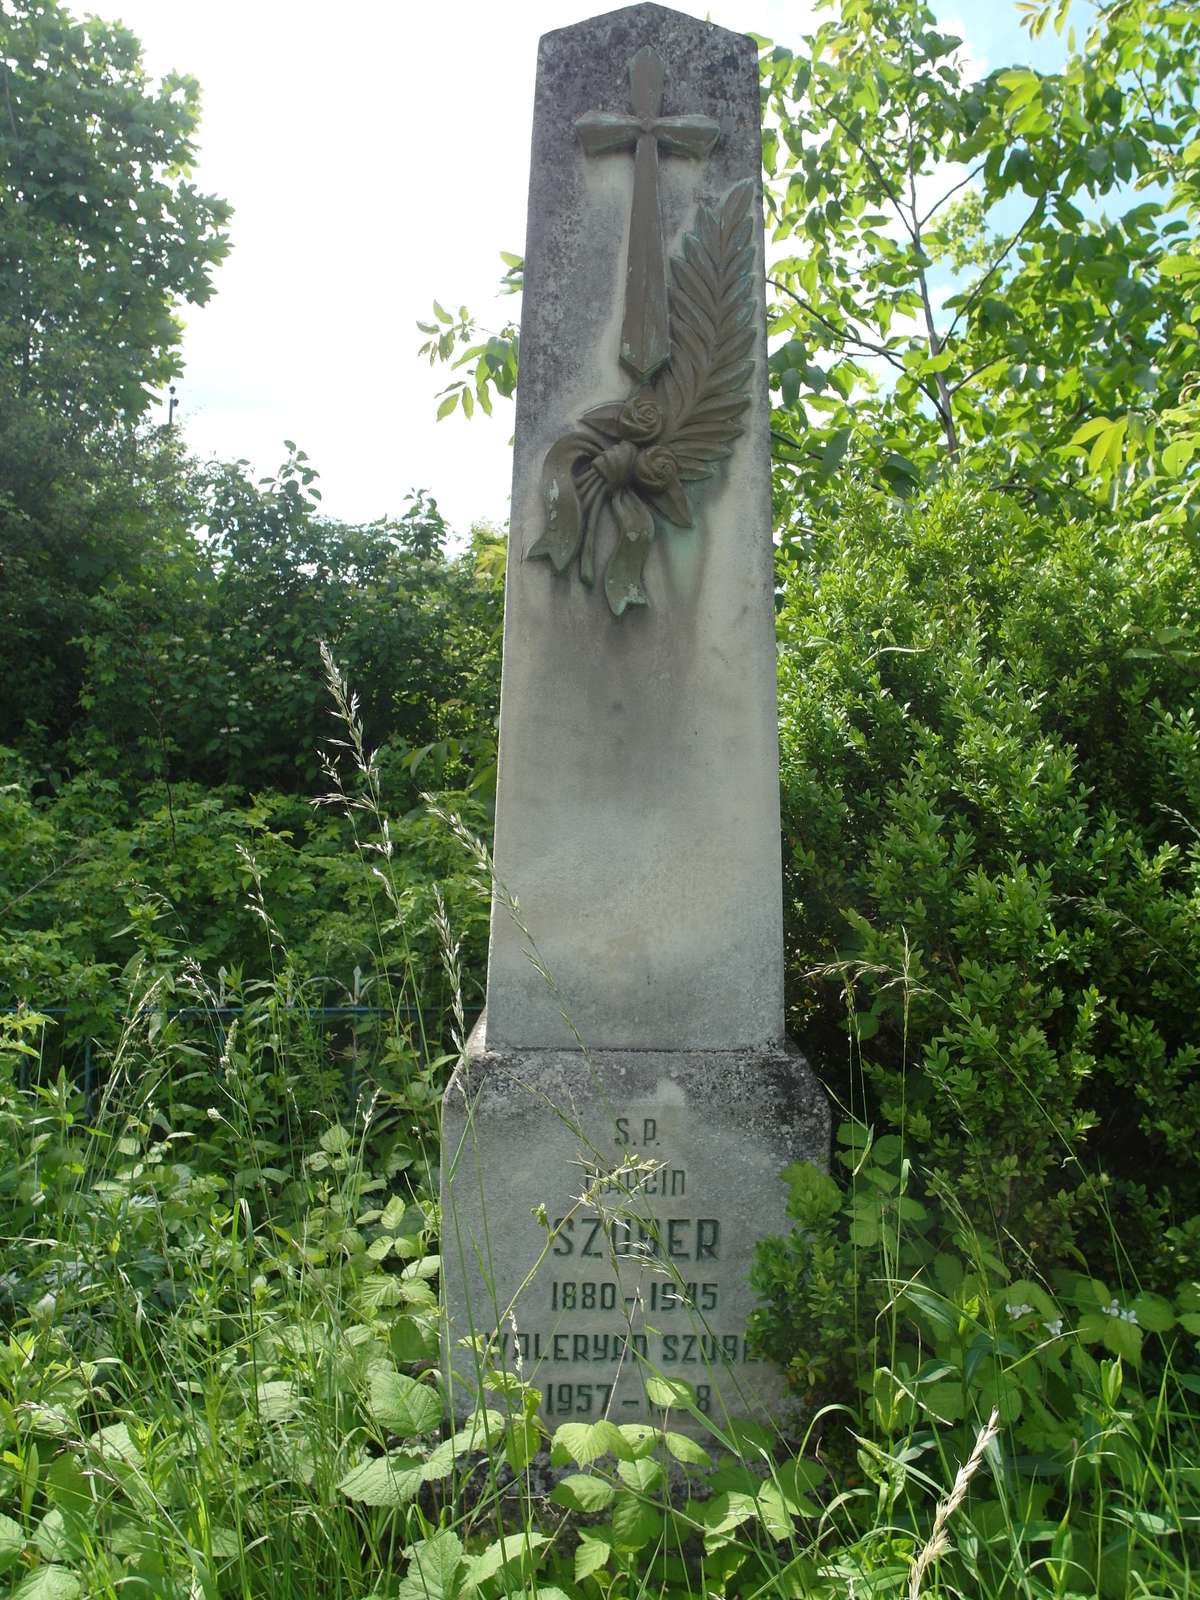 Tombstone of Martin and Walerian Szuber, Zbarazh cemetery, as of 2018.